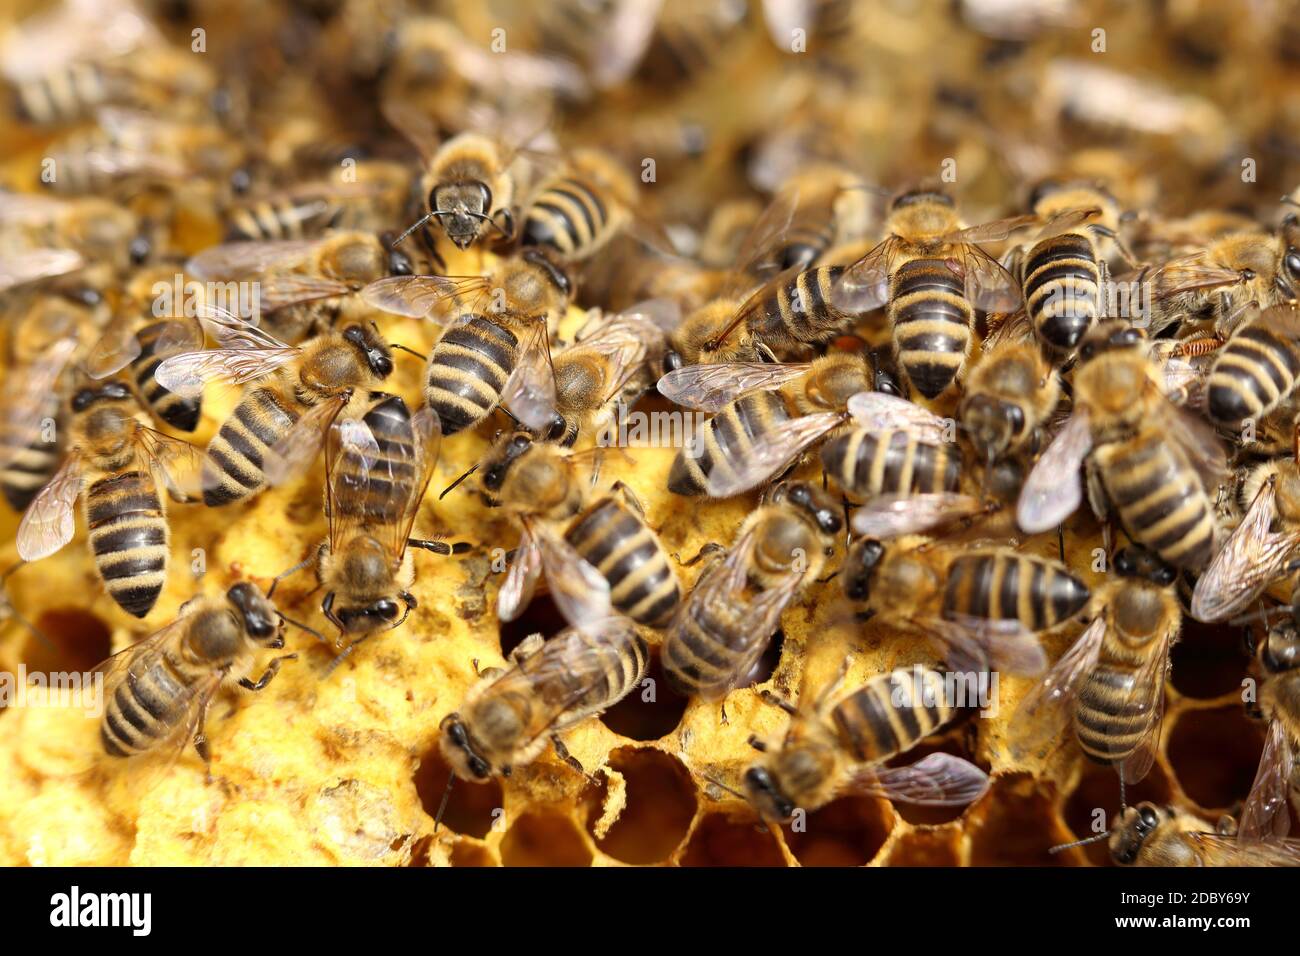 some working bees on a beeswax in beehive Stock Photo